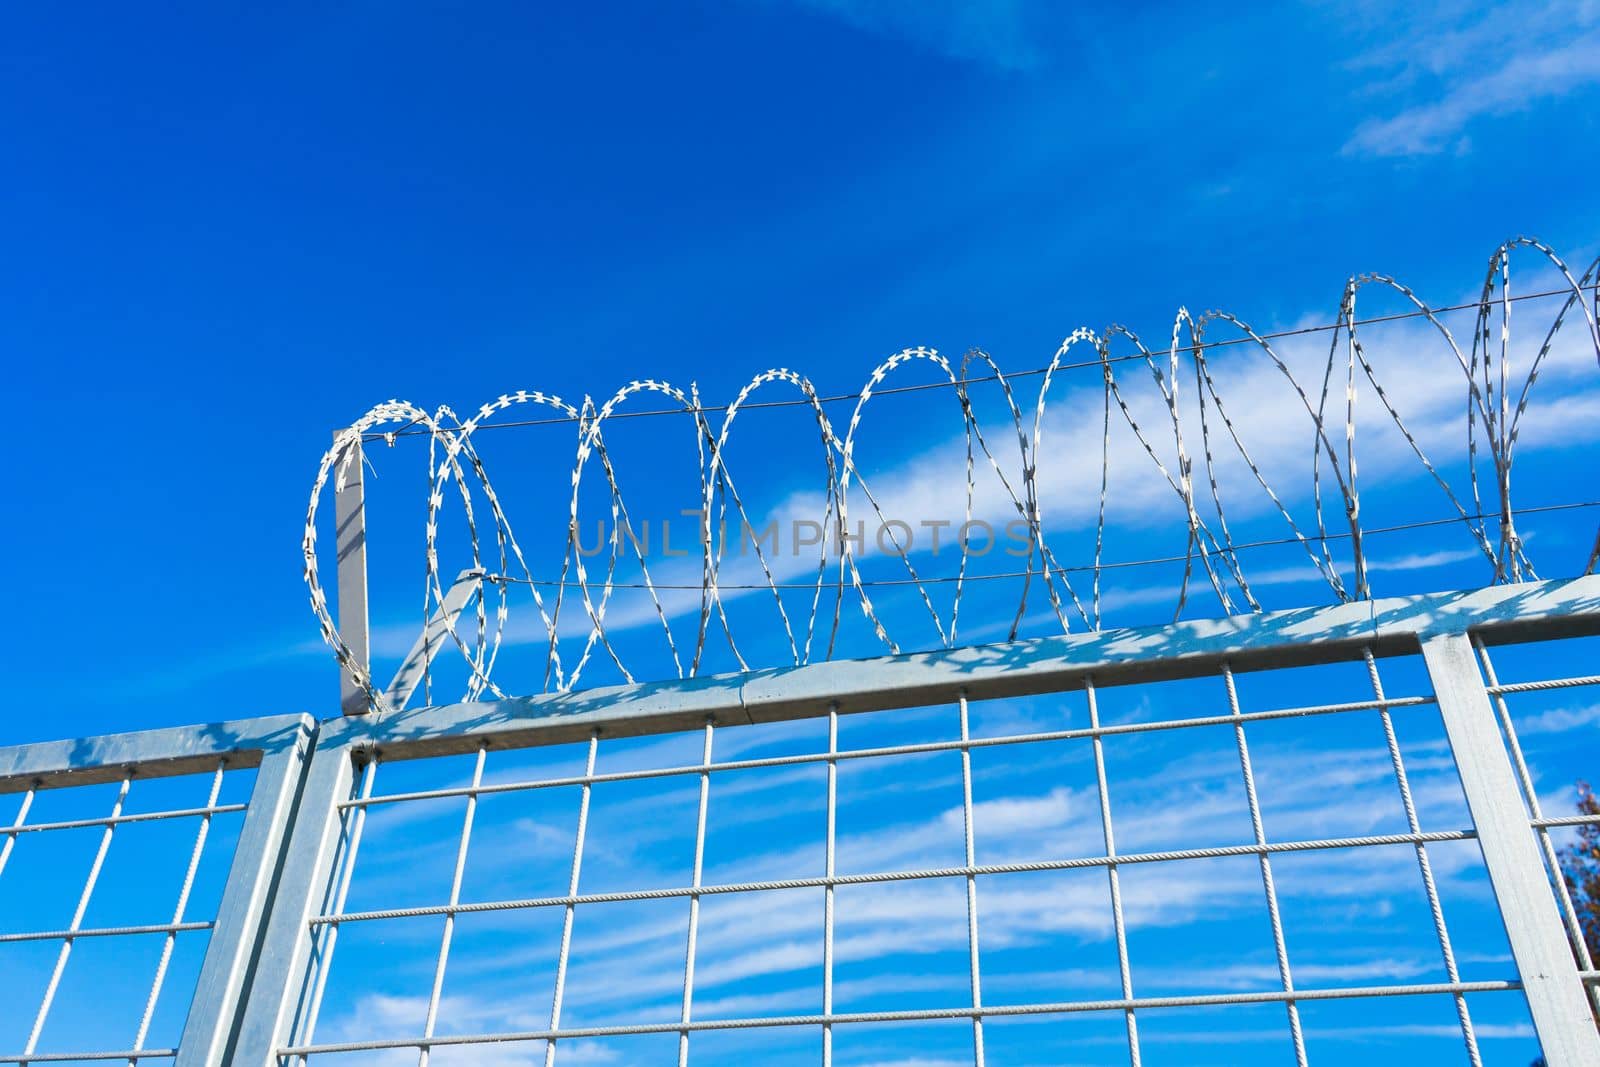 Barbered wire over a blue sky and on building ground, rusty by Zelenin